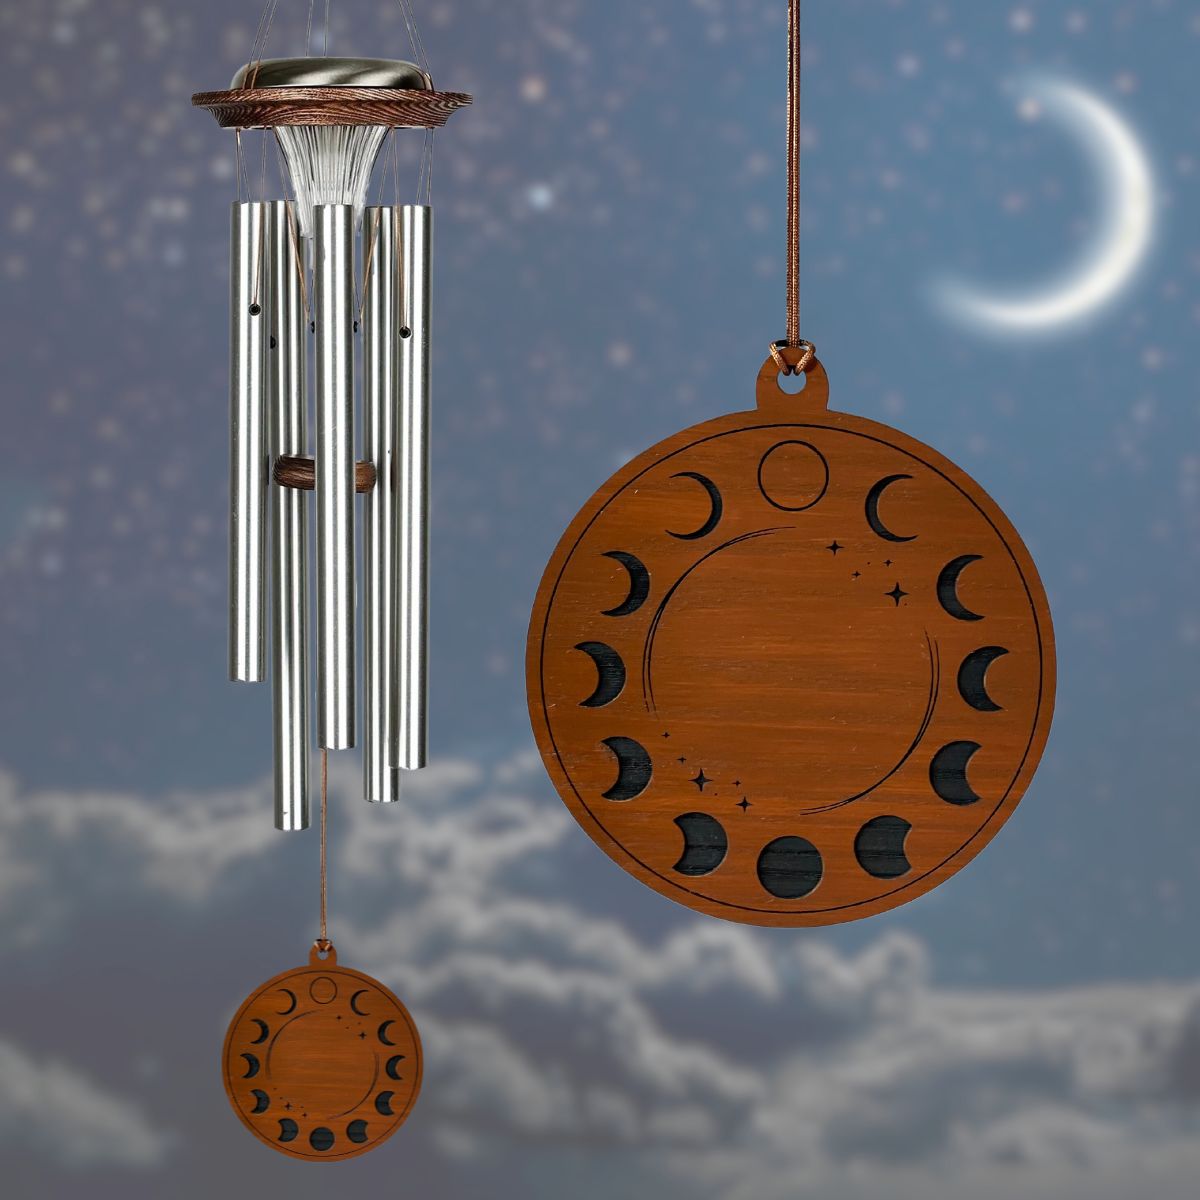 Moonlight Solar Chime 29 Inch Wind Chime - Engravable Moon Phase Sail - Silver